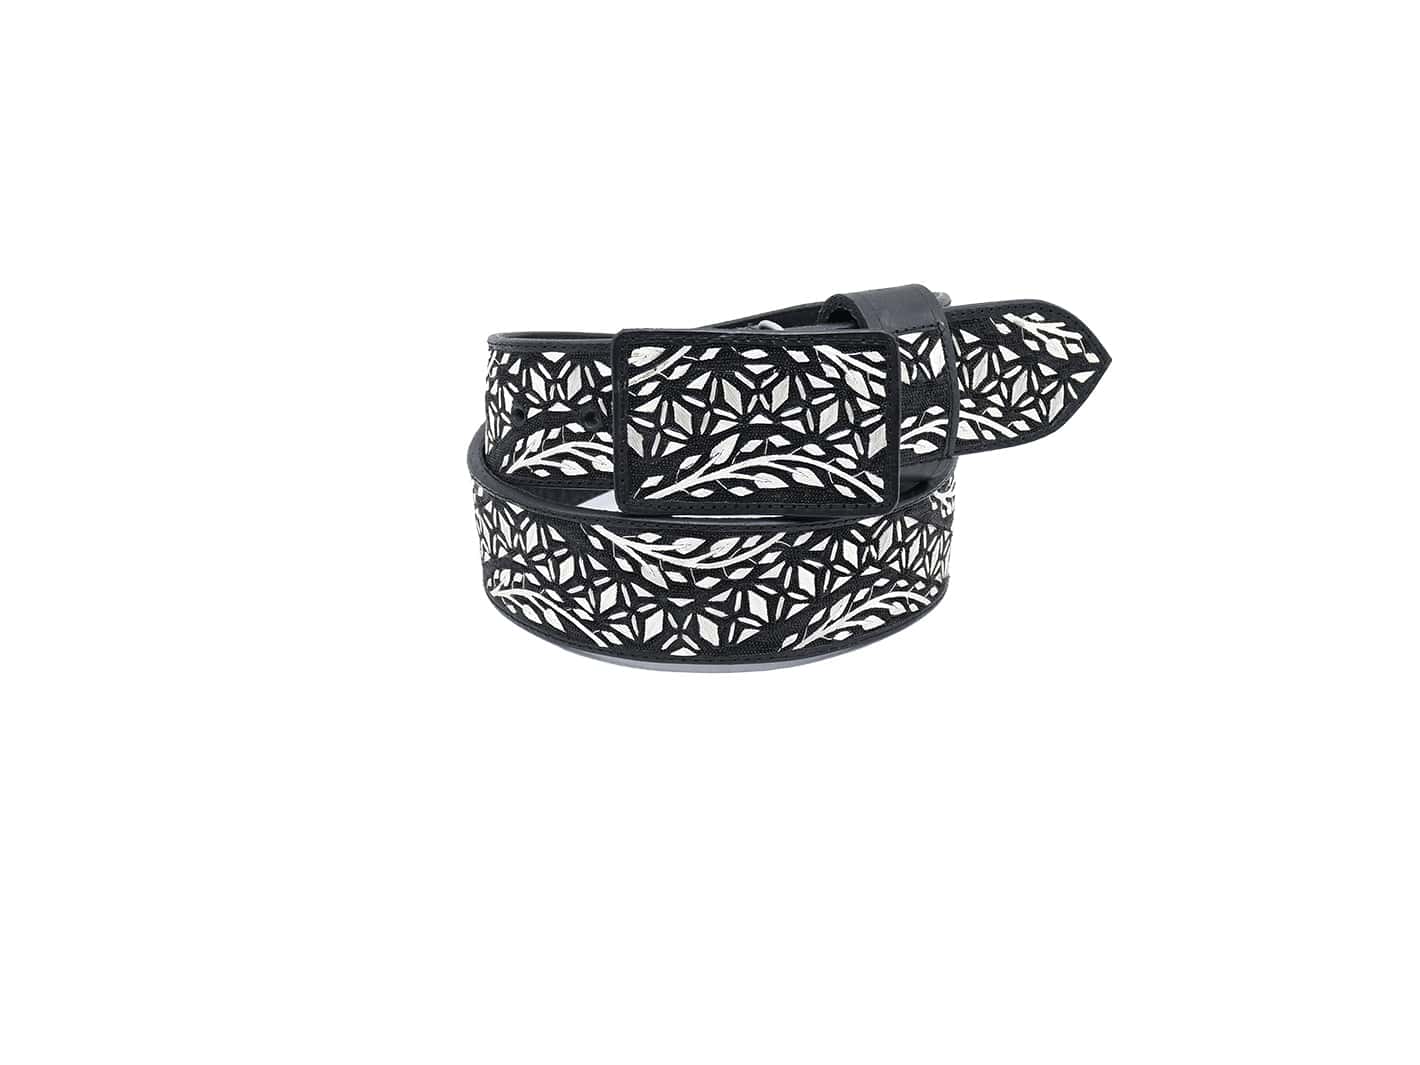 Charro Western Belt embroidered with Silver Thread